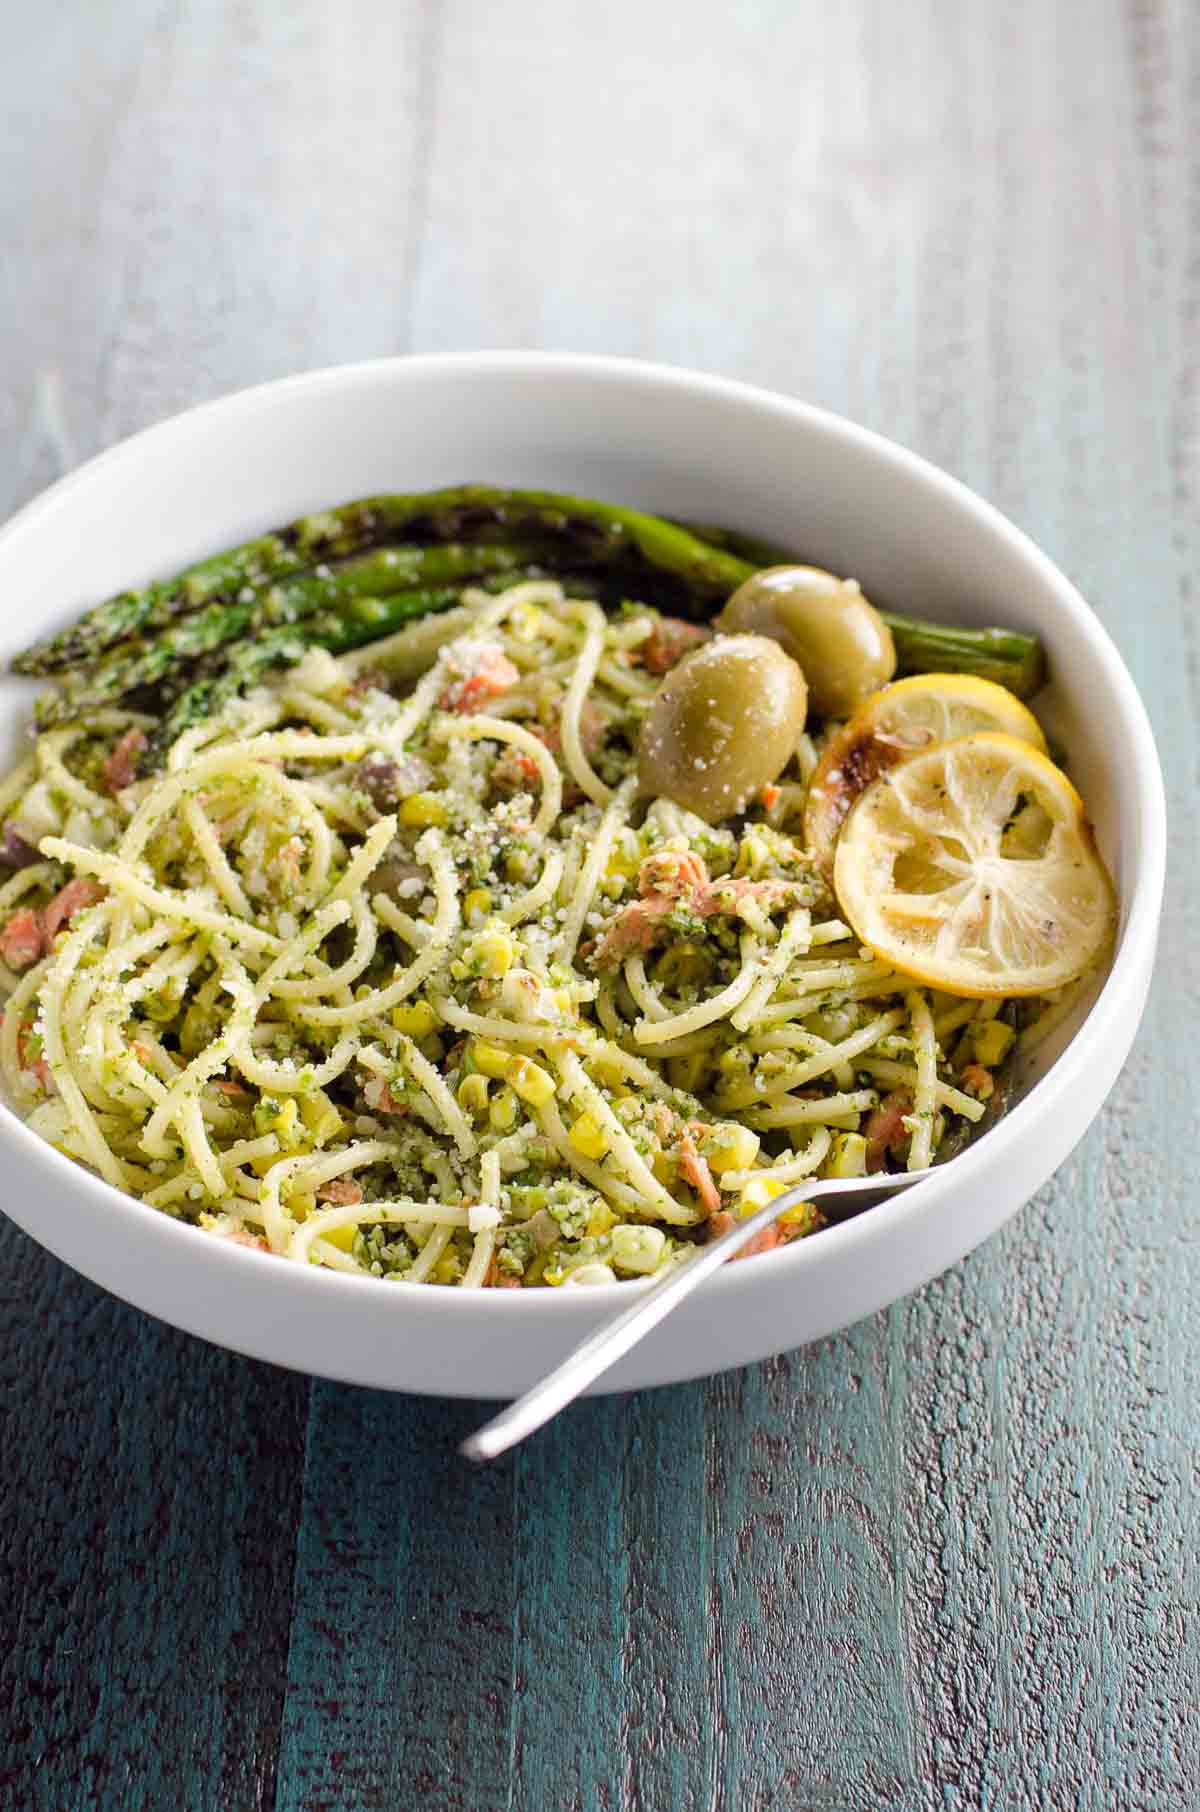 salmon pasta with pesto, asparagus, corn, and olives in a bowl with a fork